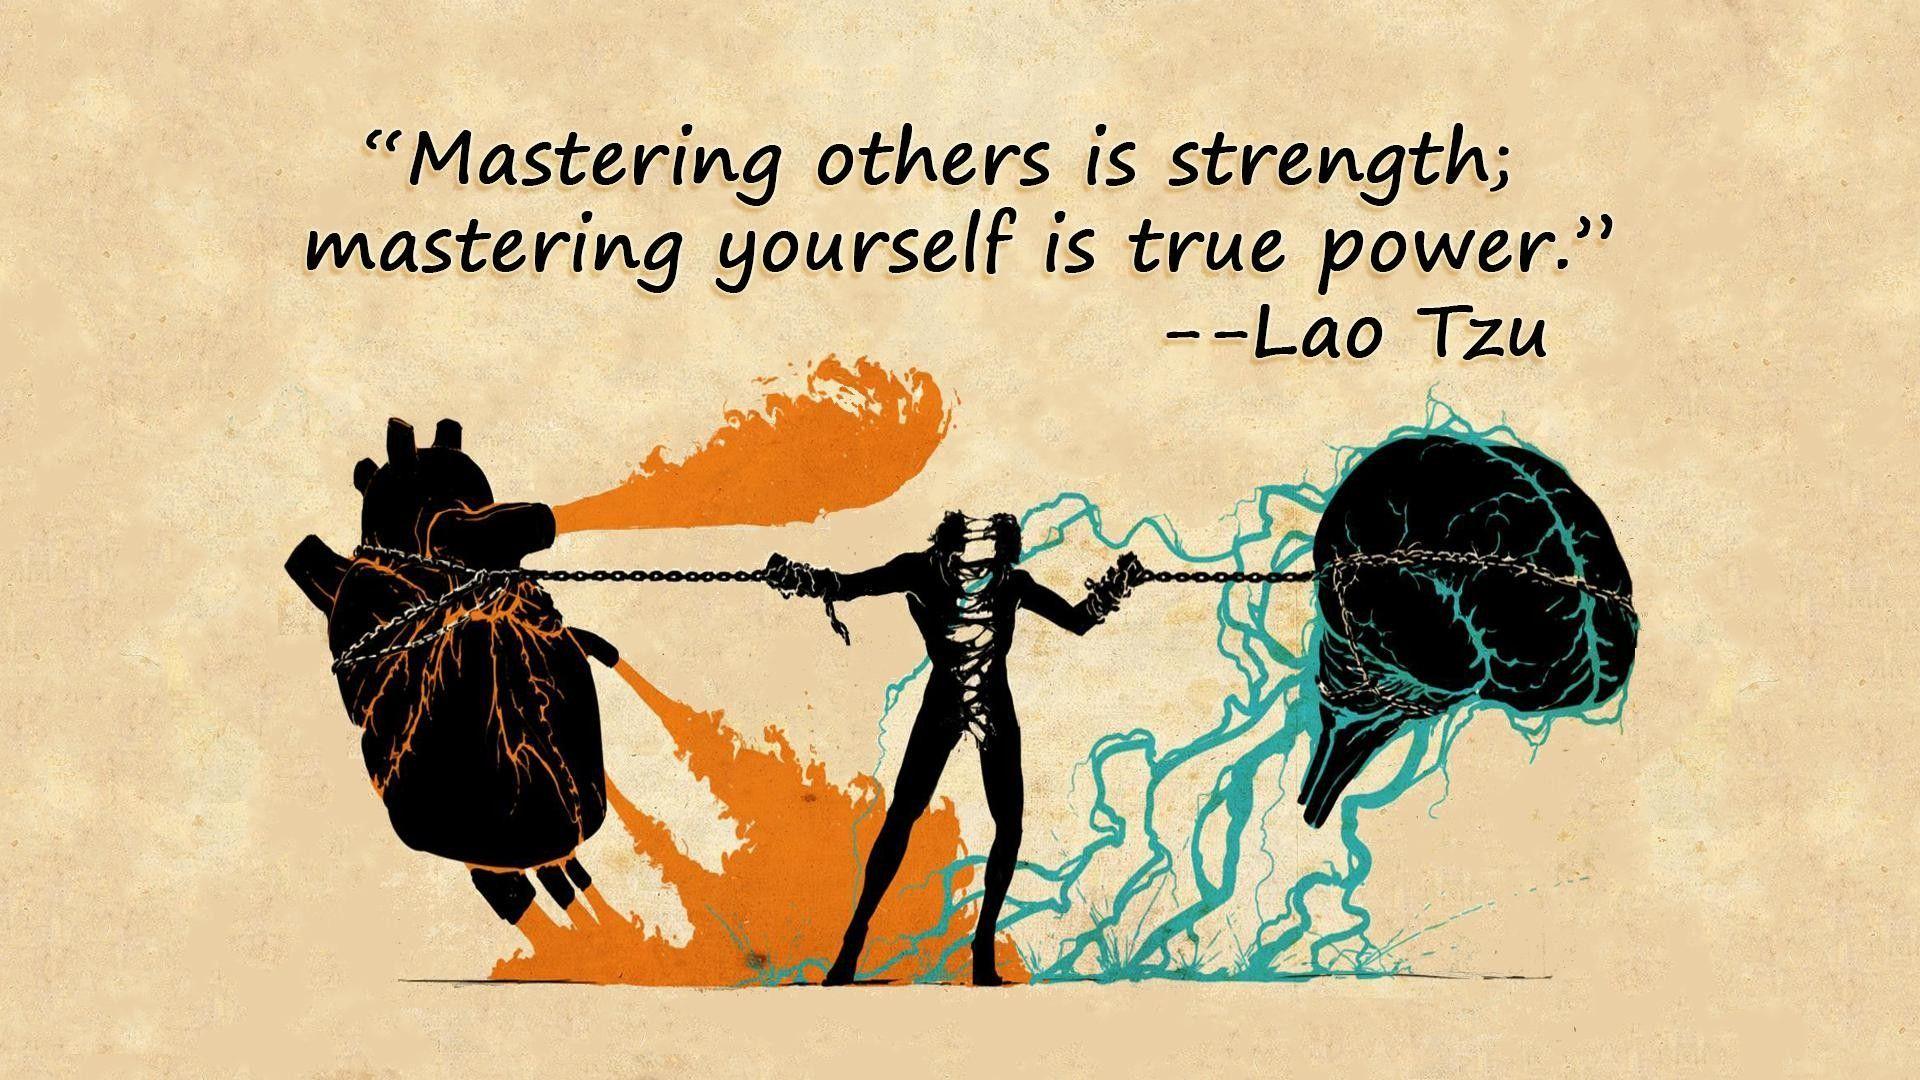 quotes Taoism Lao Tzu / 1920x1080 Wallpaper. Food for Thought